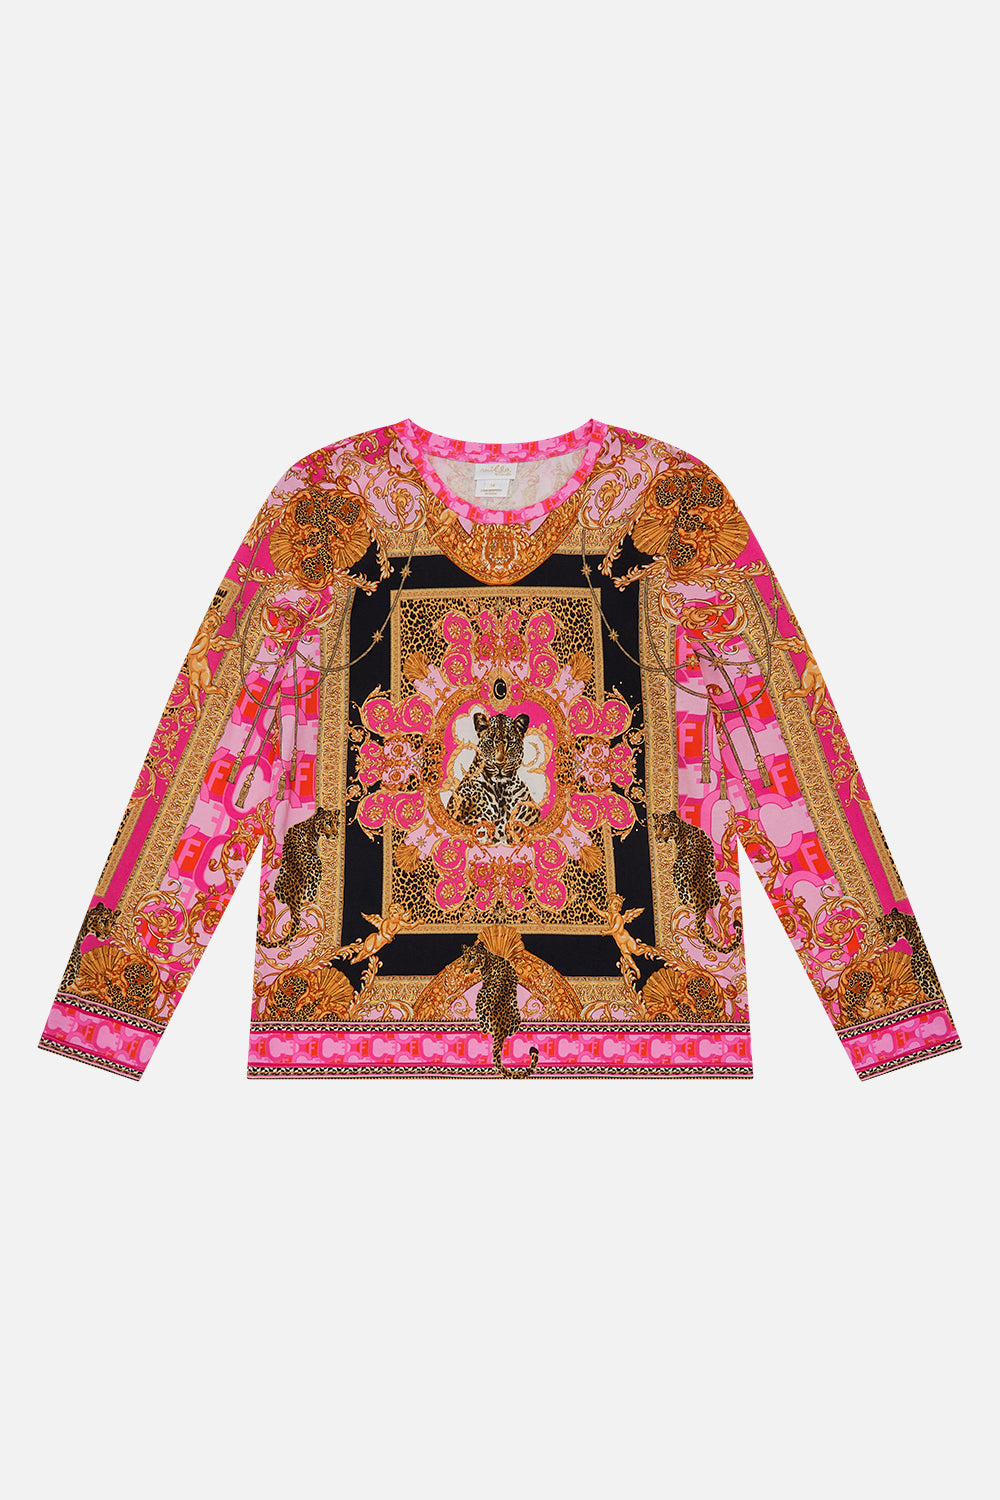 Product view of MILLA BY CAMILLA kids long sleeve top in Ciao Palazzo printed